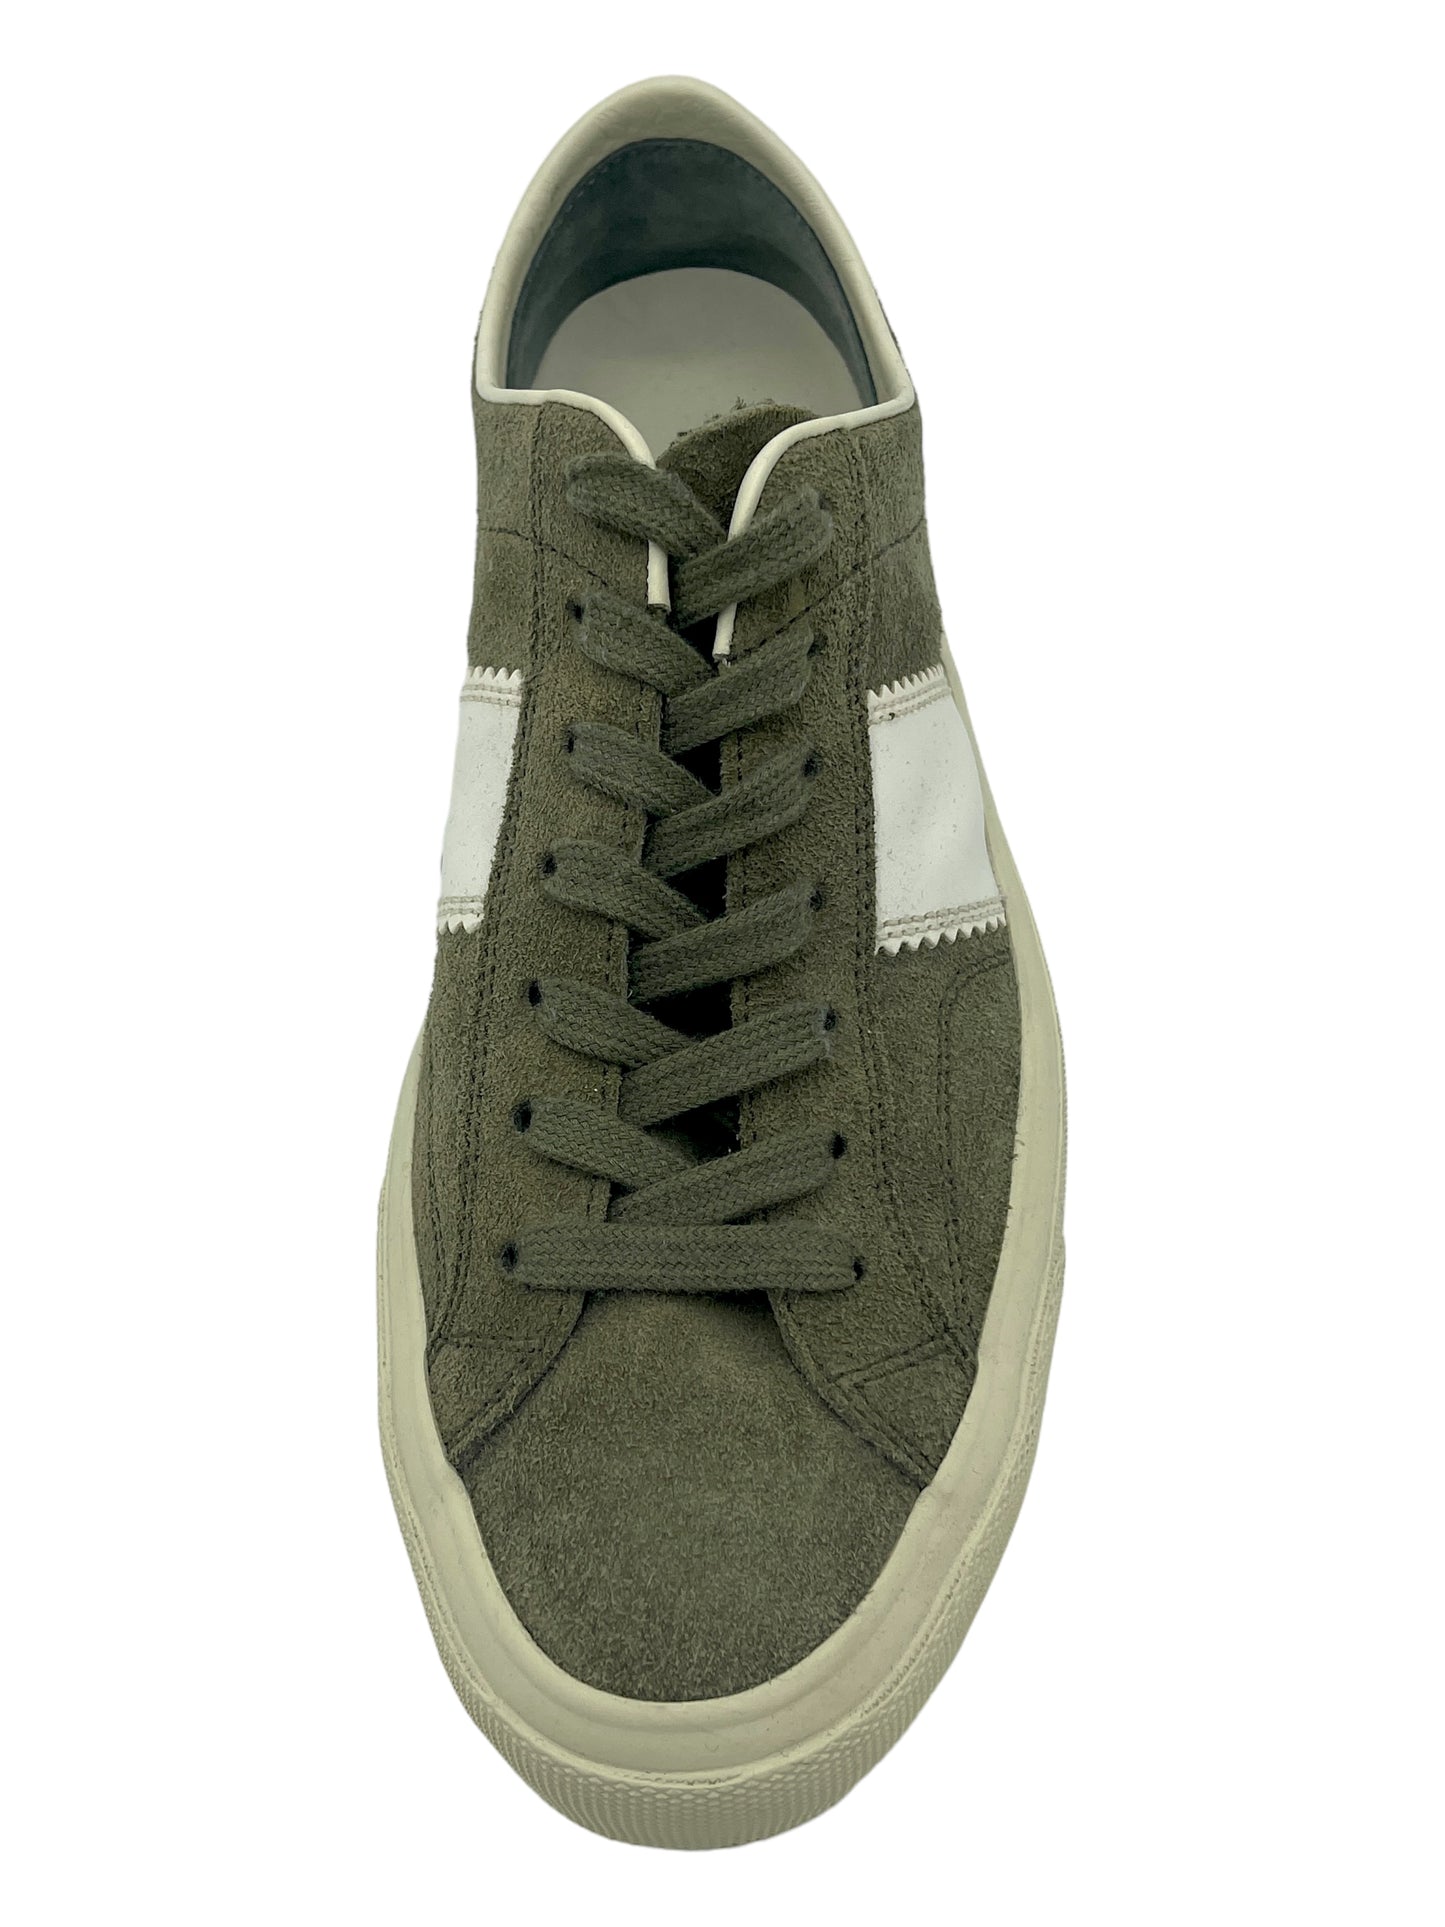 Tom Ford Green Suede Cambridge Lace Up Sneaker